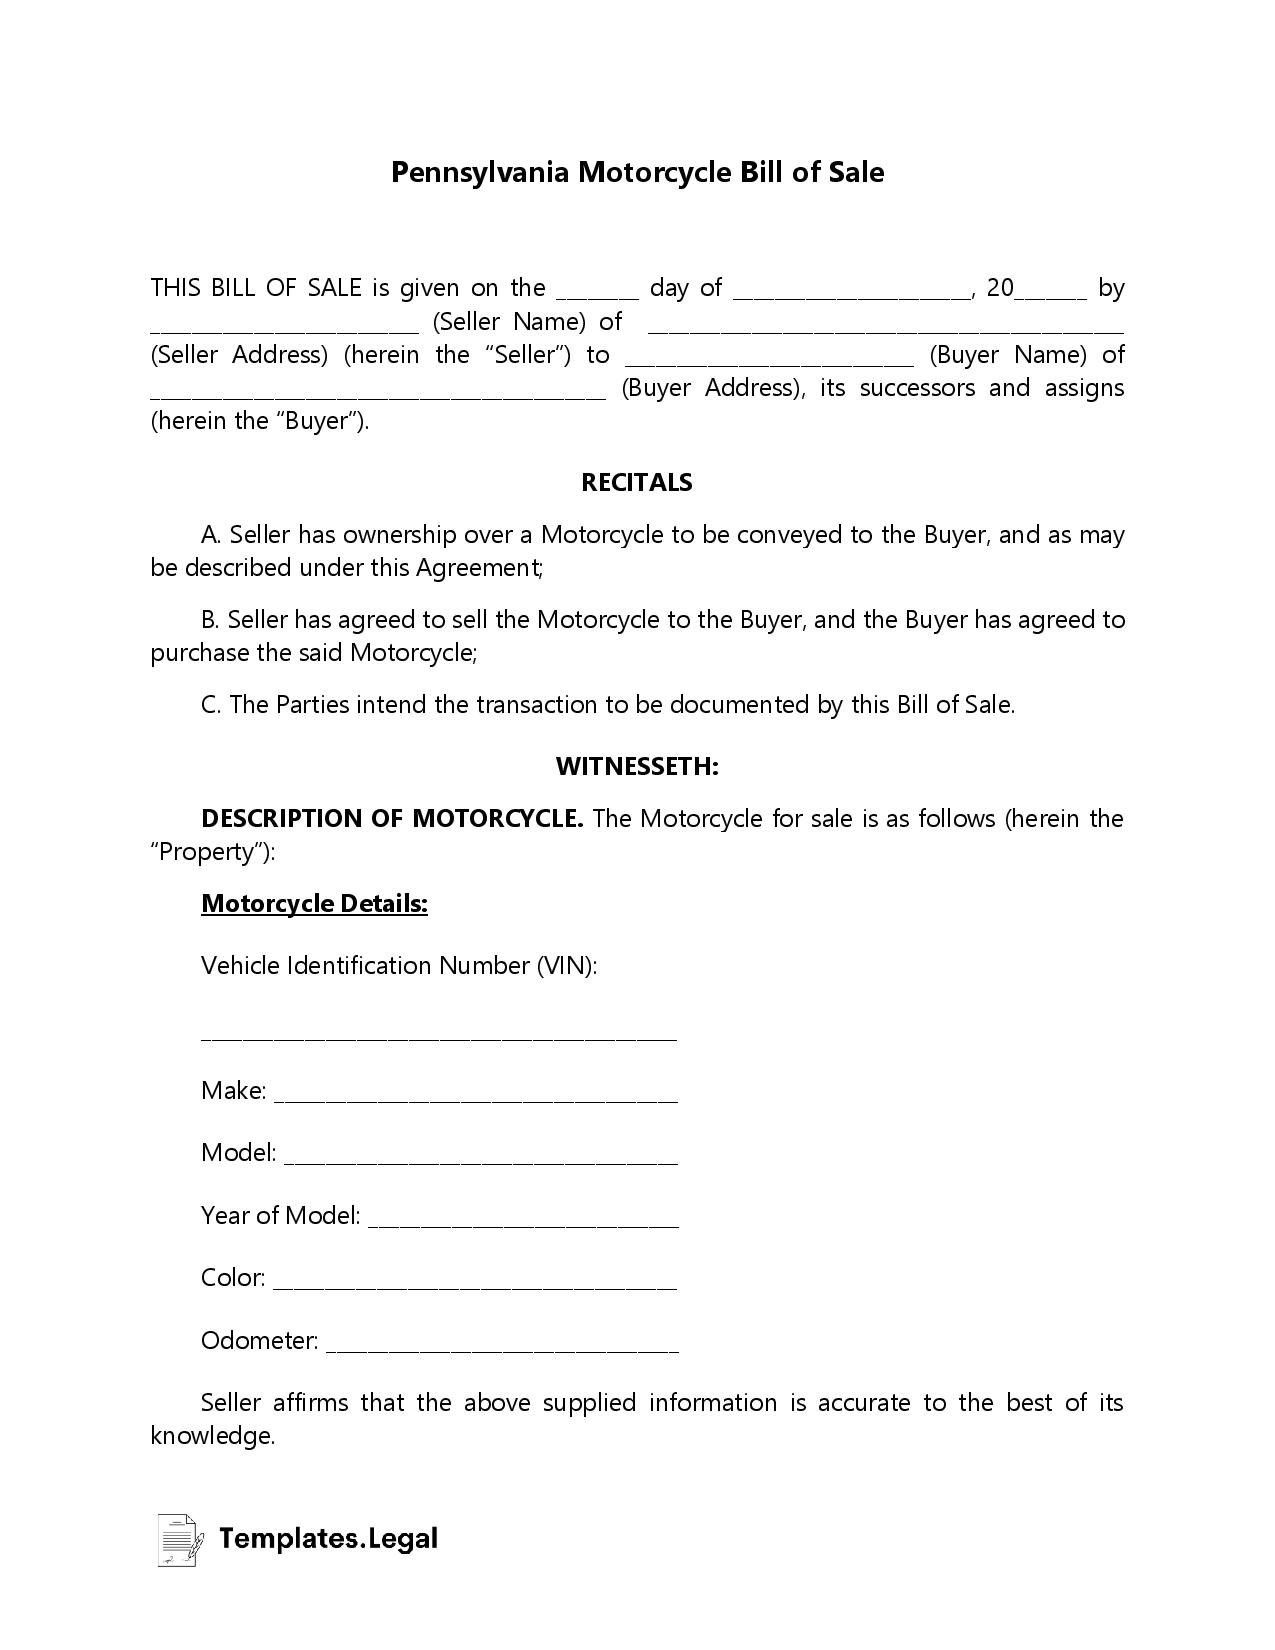 Pennsylvania Motorcycle Bill of Sale - Templates.Legal